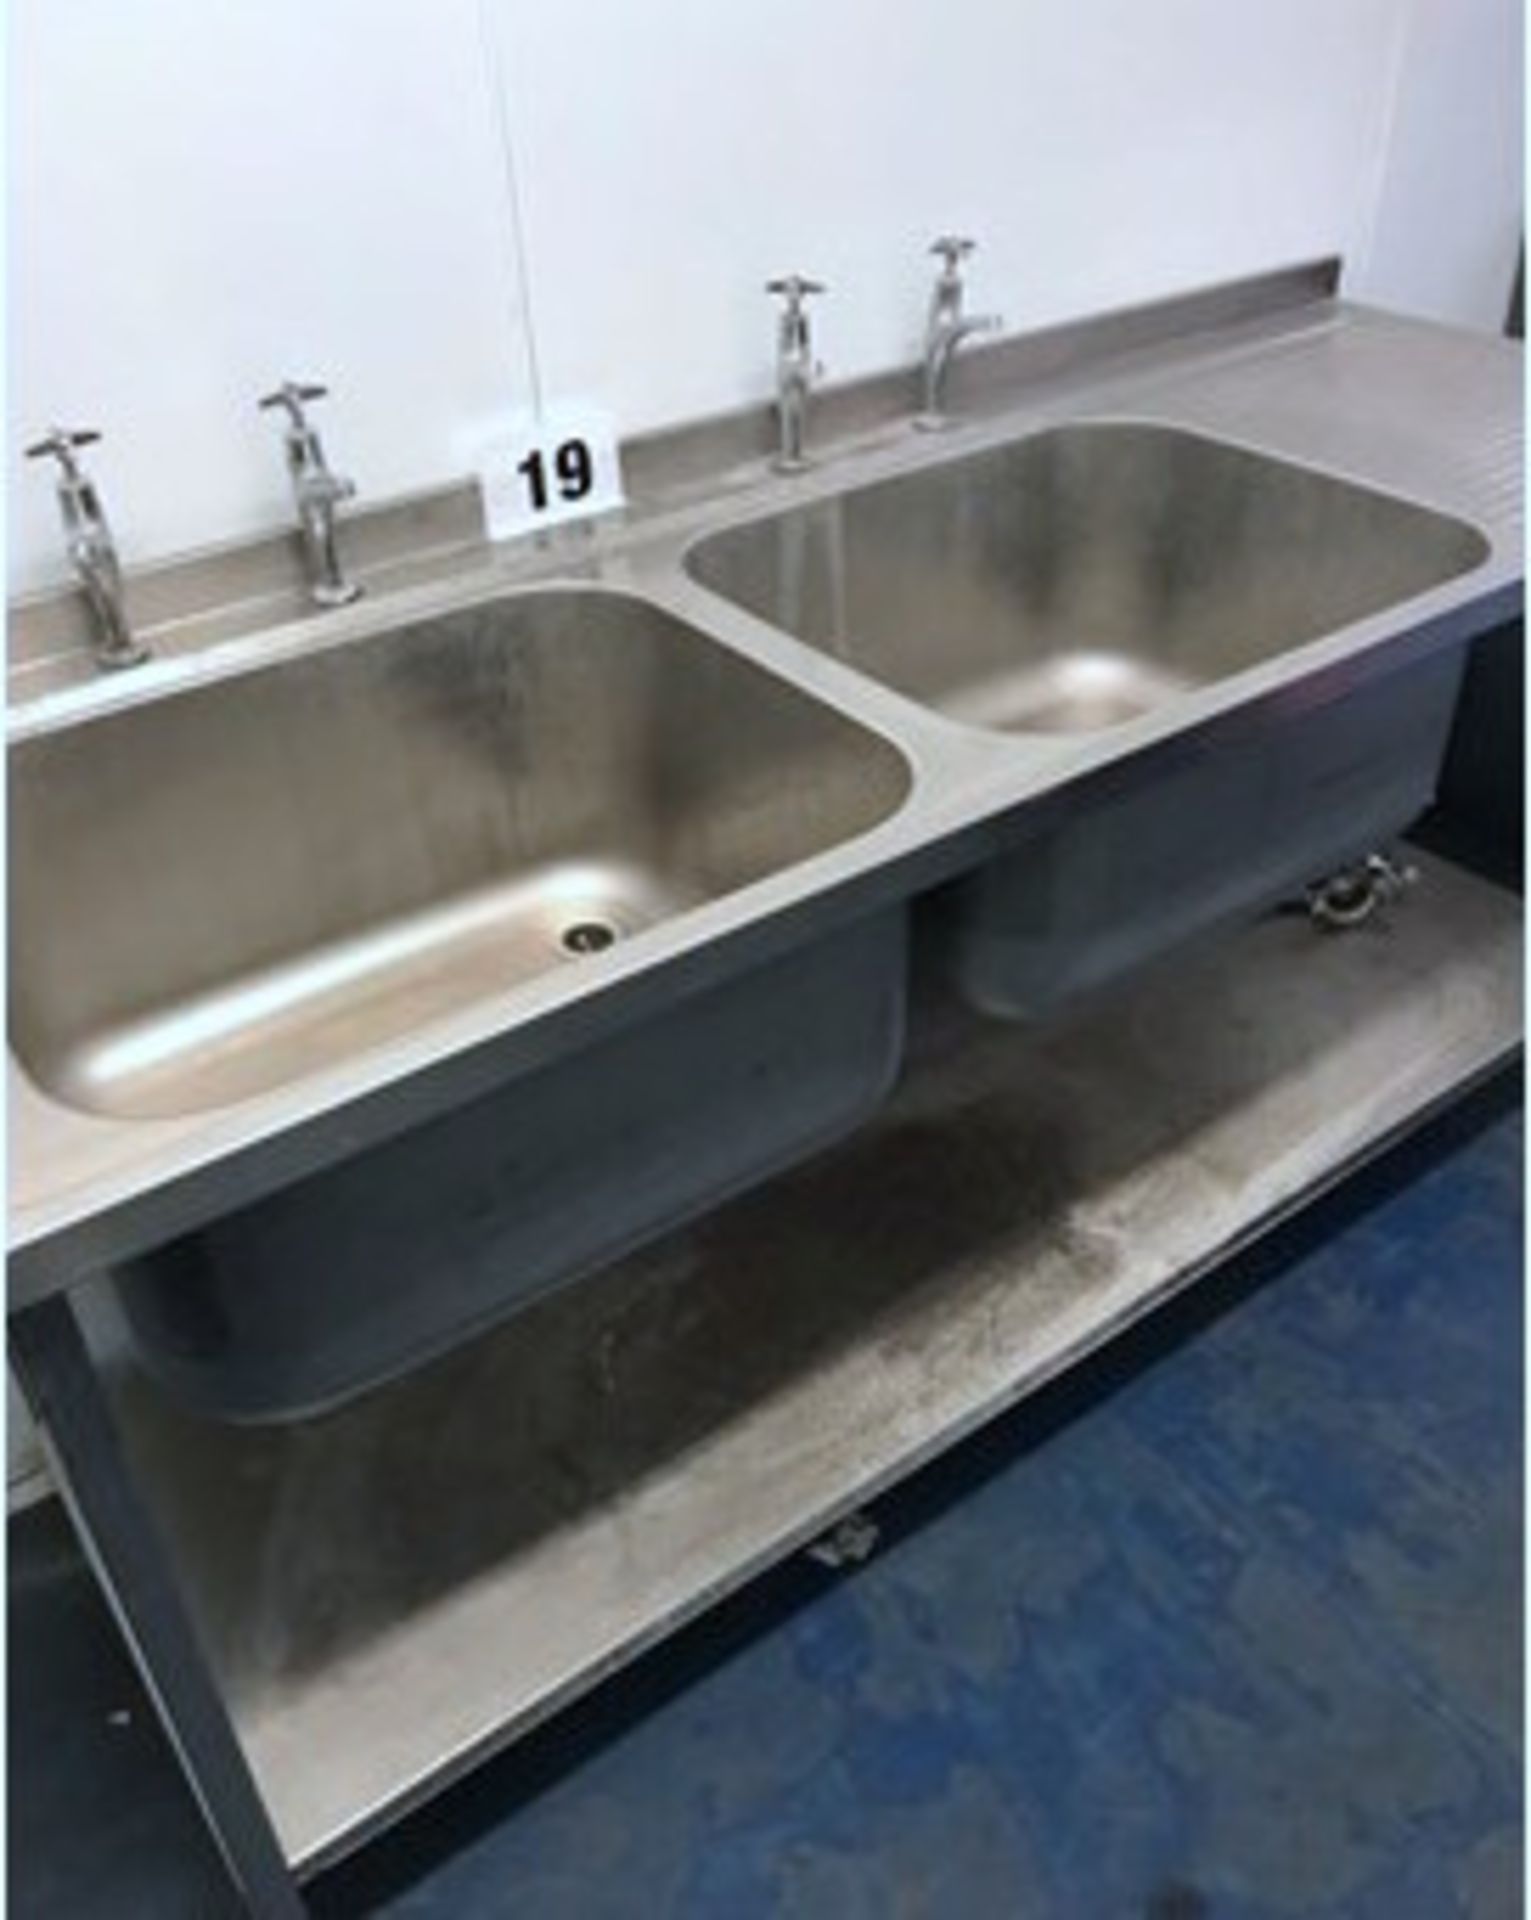 S/S Syspal double sink. Approx. 1800mm long x 865mm high LO £10 - Image 3 of 3